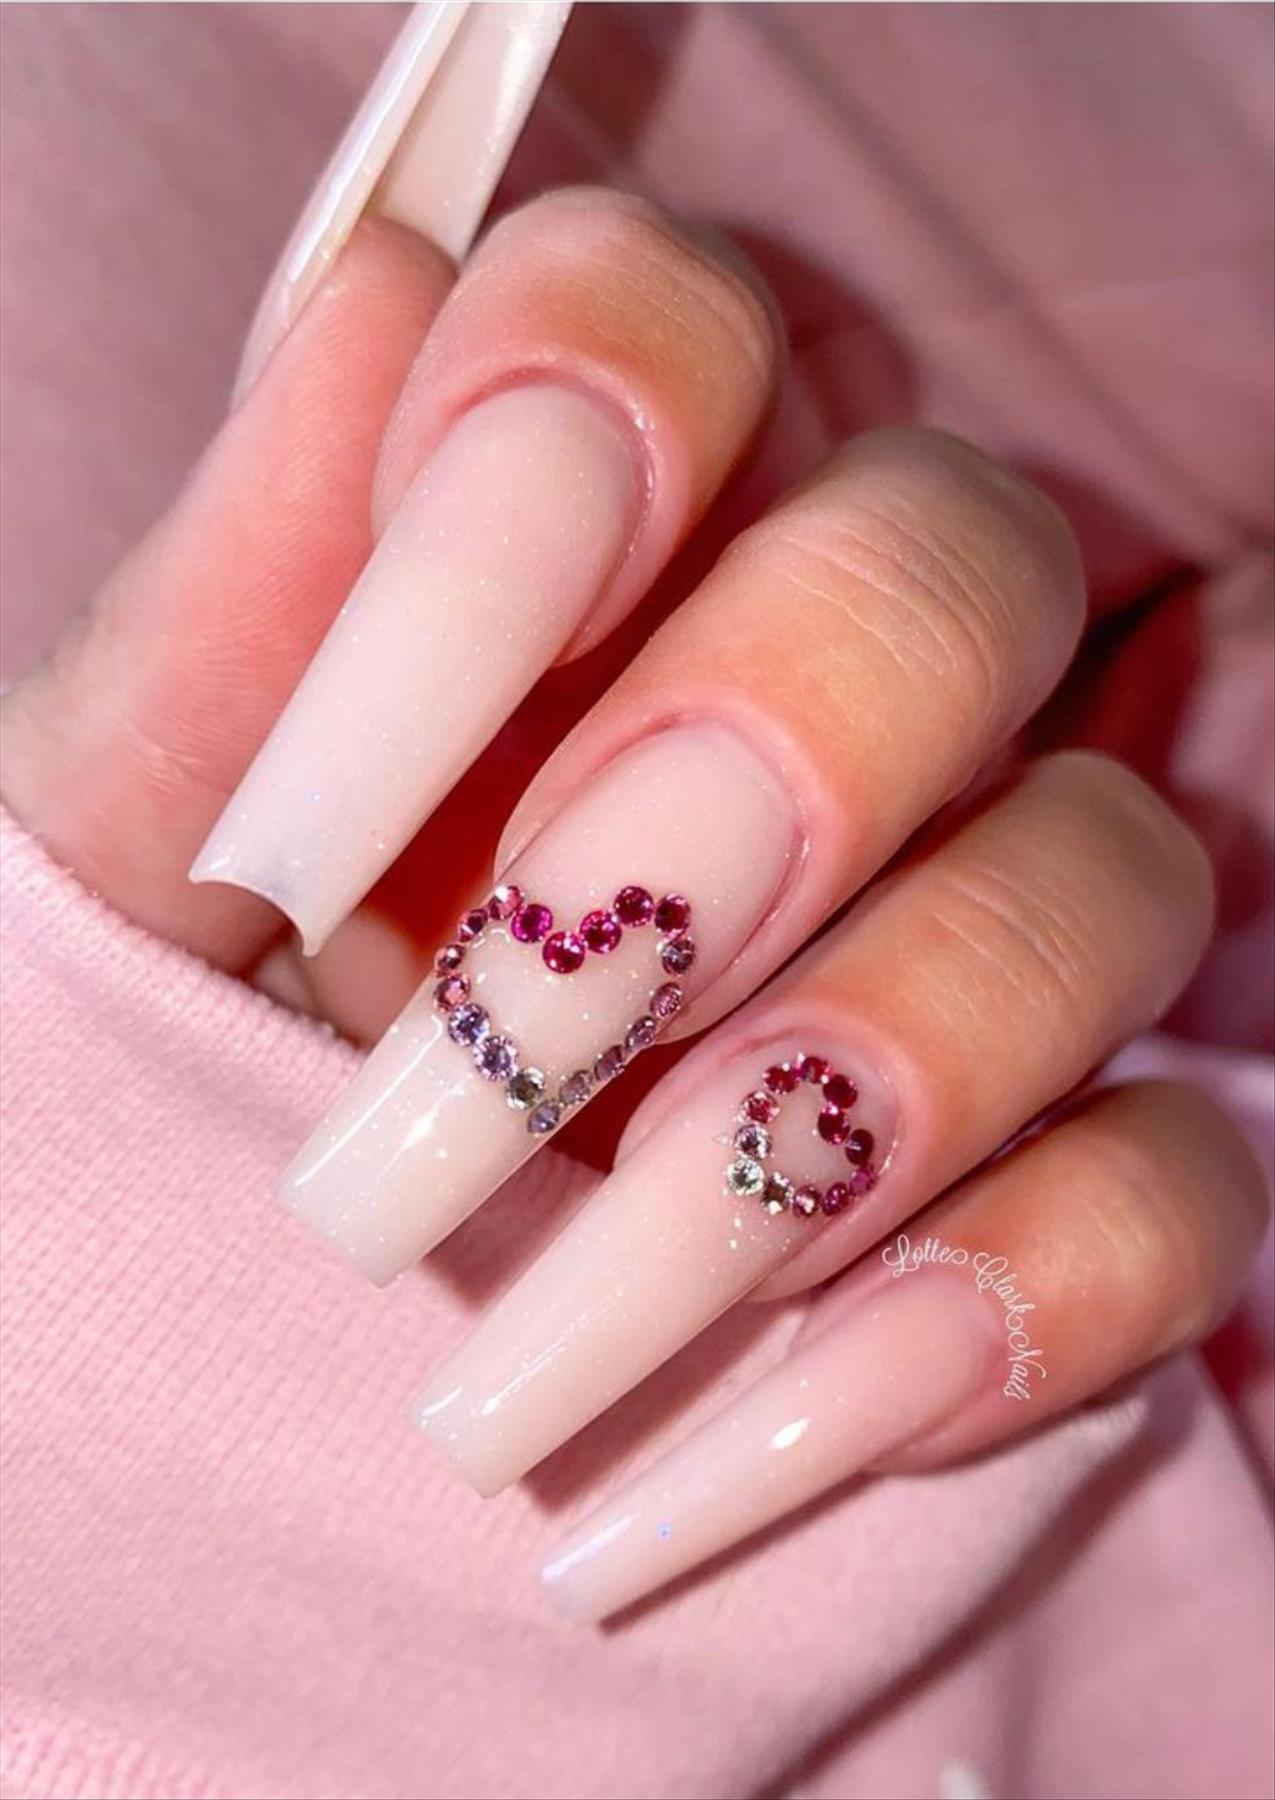 French Pink Tip Nails & Pink Nails For Your Next Manicure